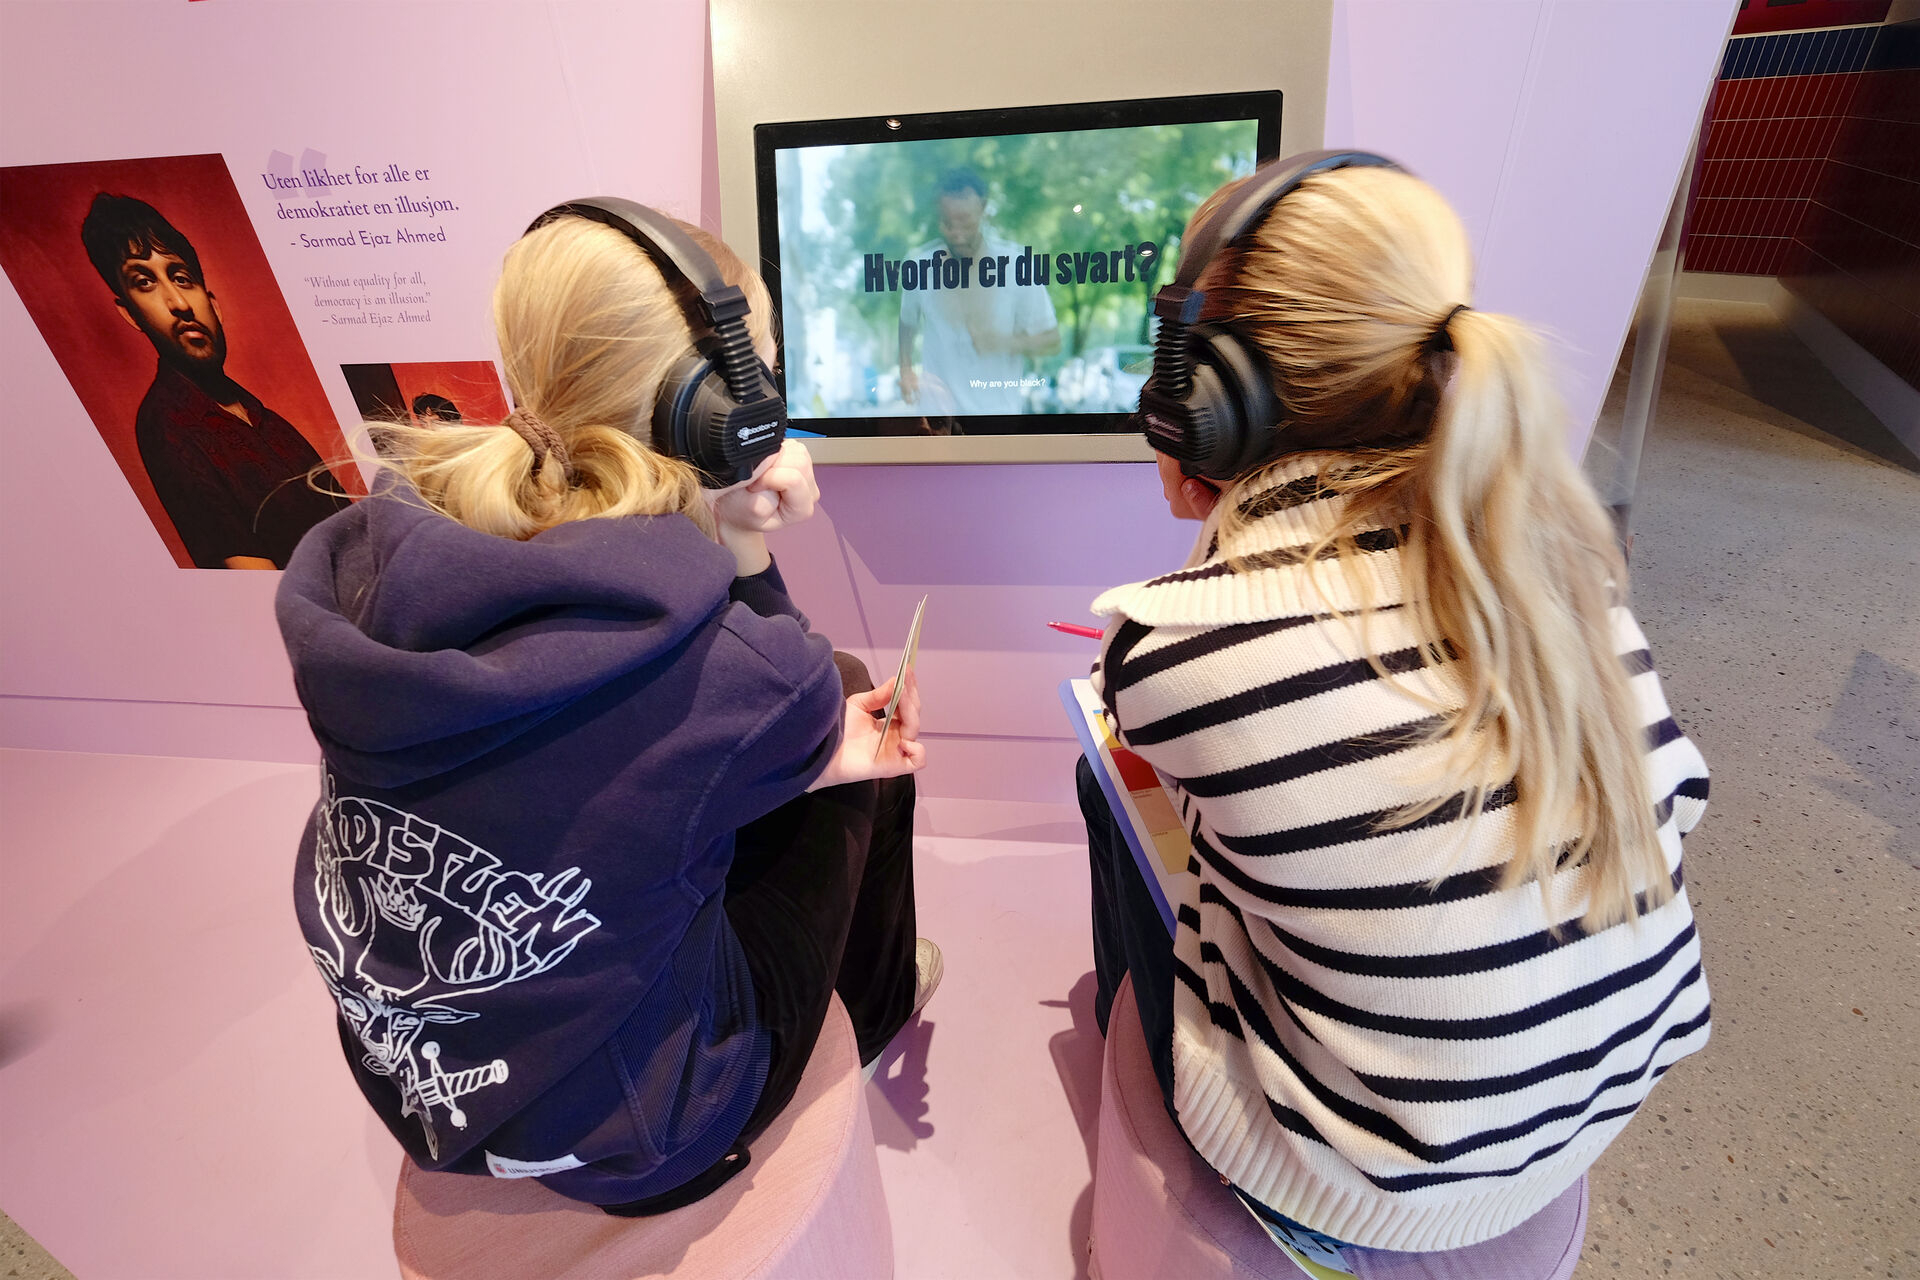 Two young girls with headsets watching a film on a screen